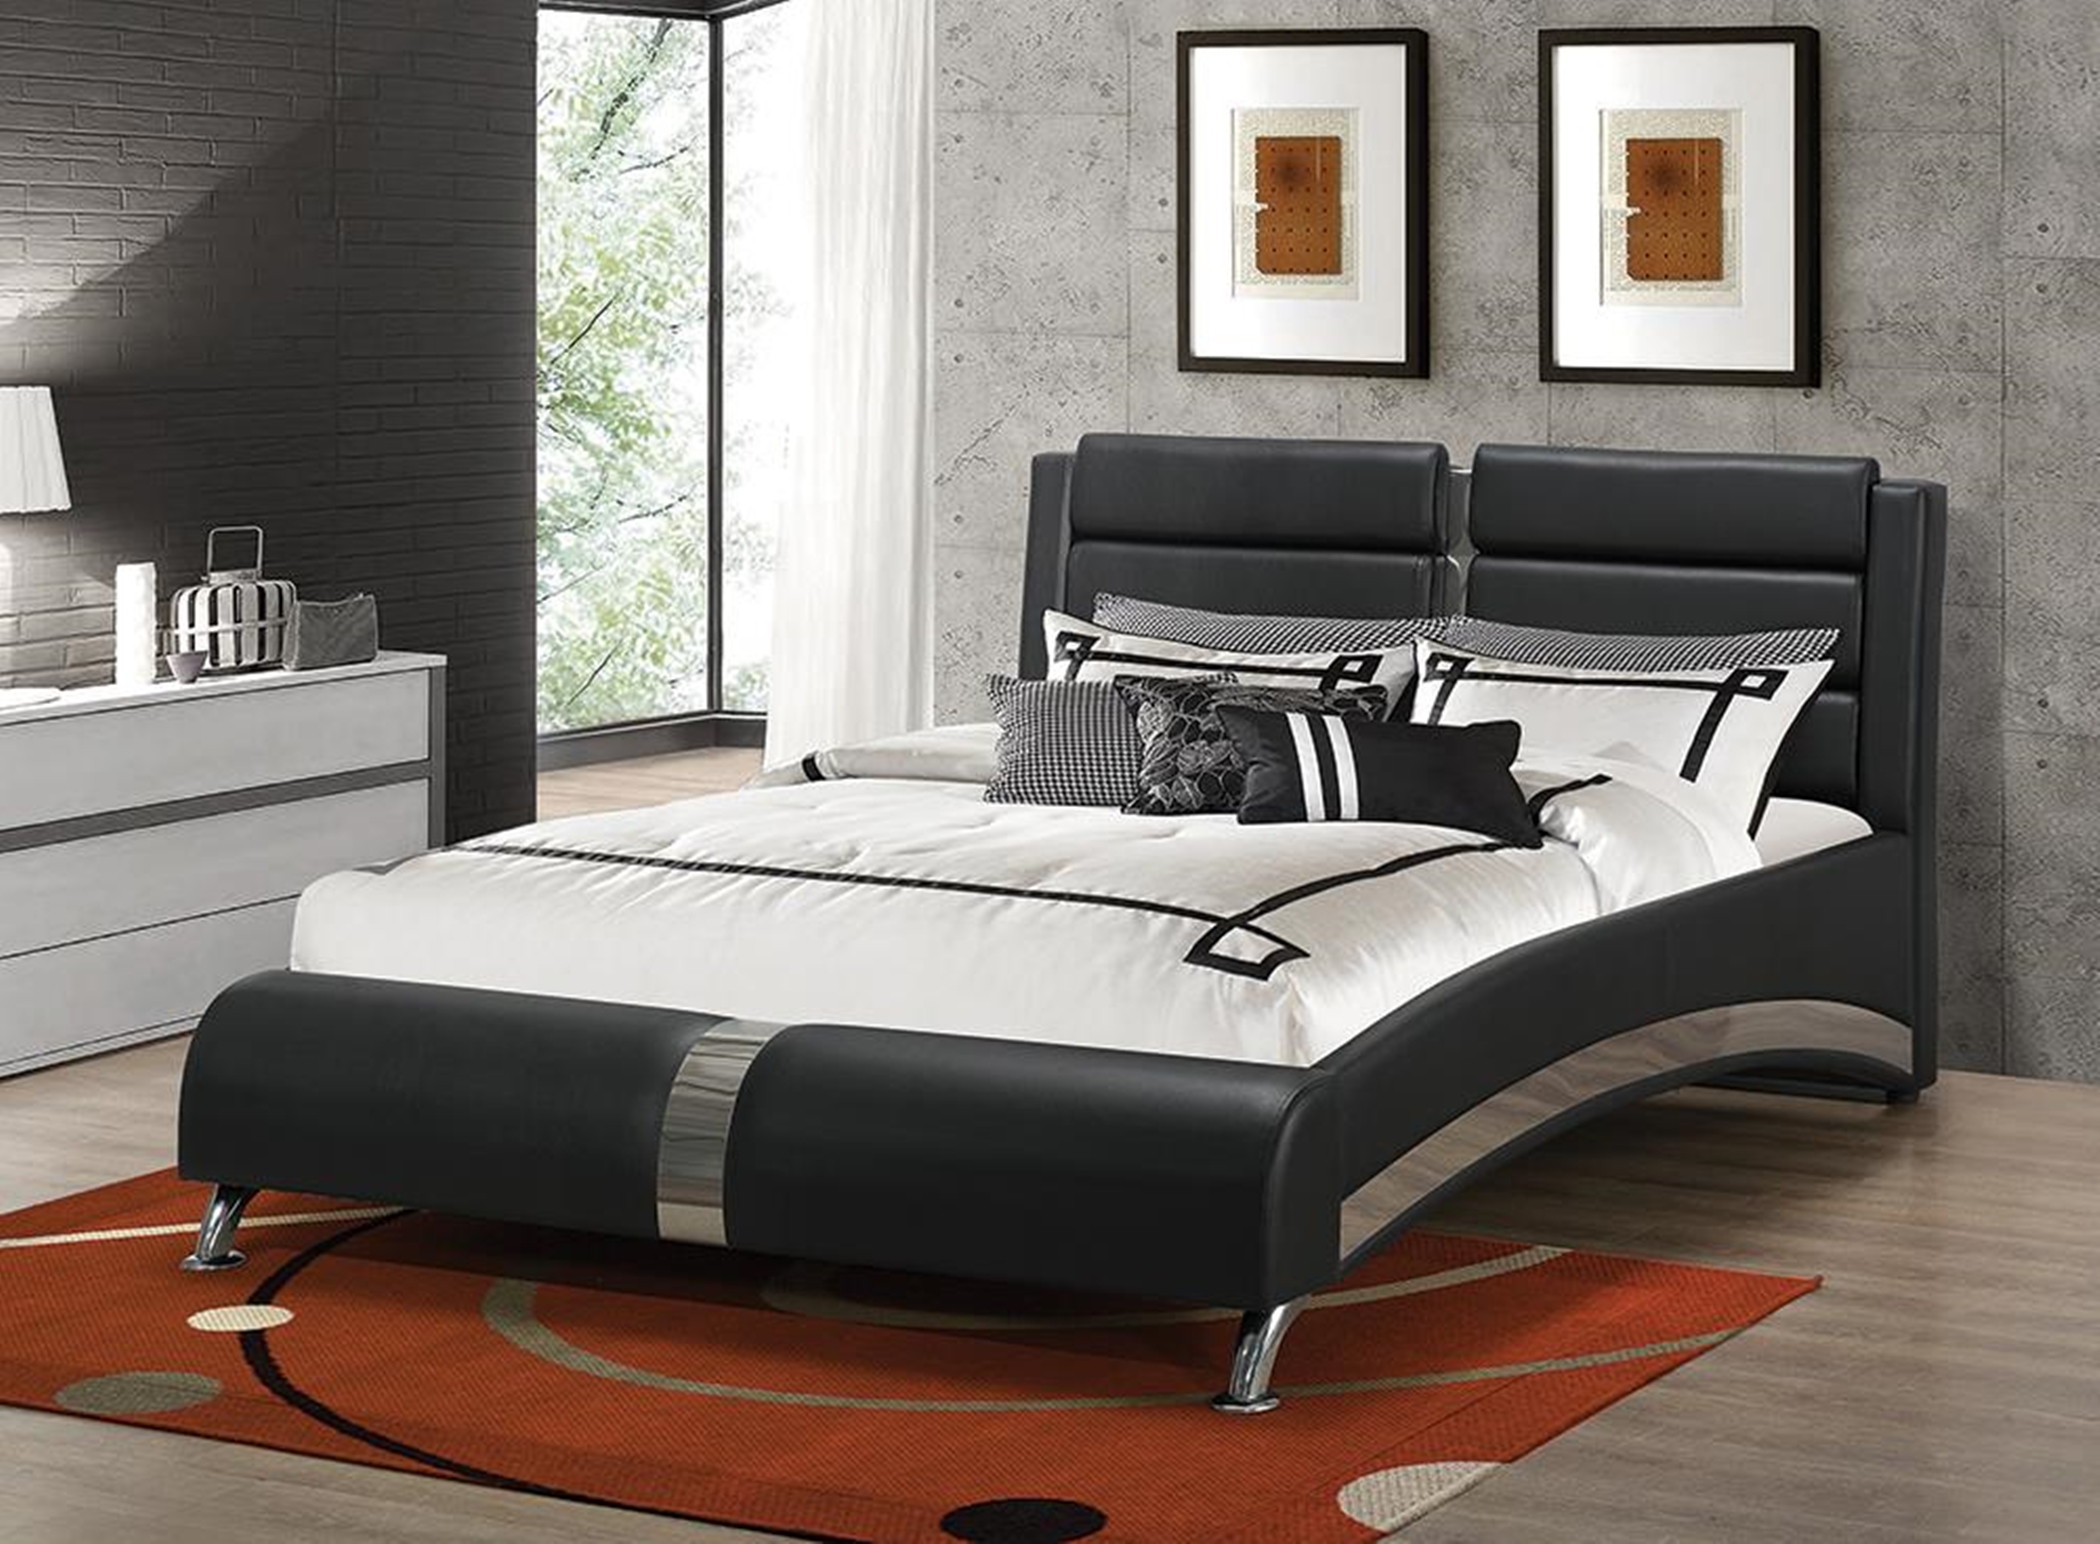 Havering Black and White Upholstered Queen Bed